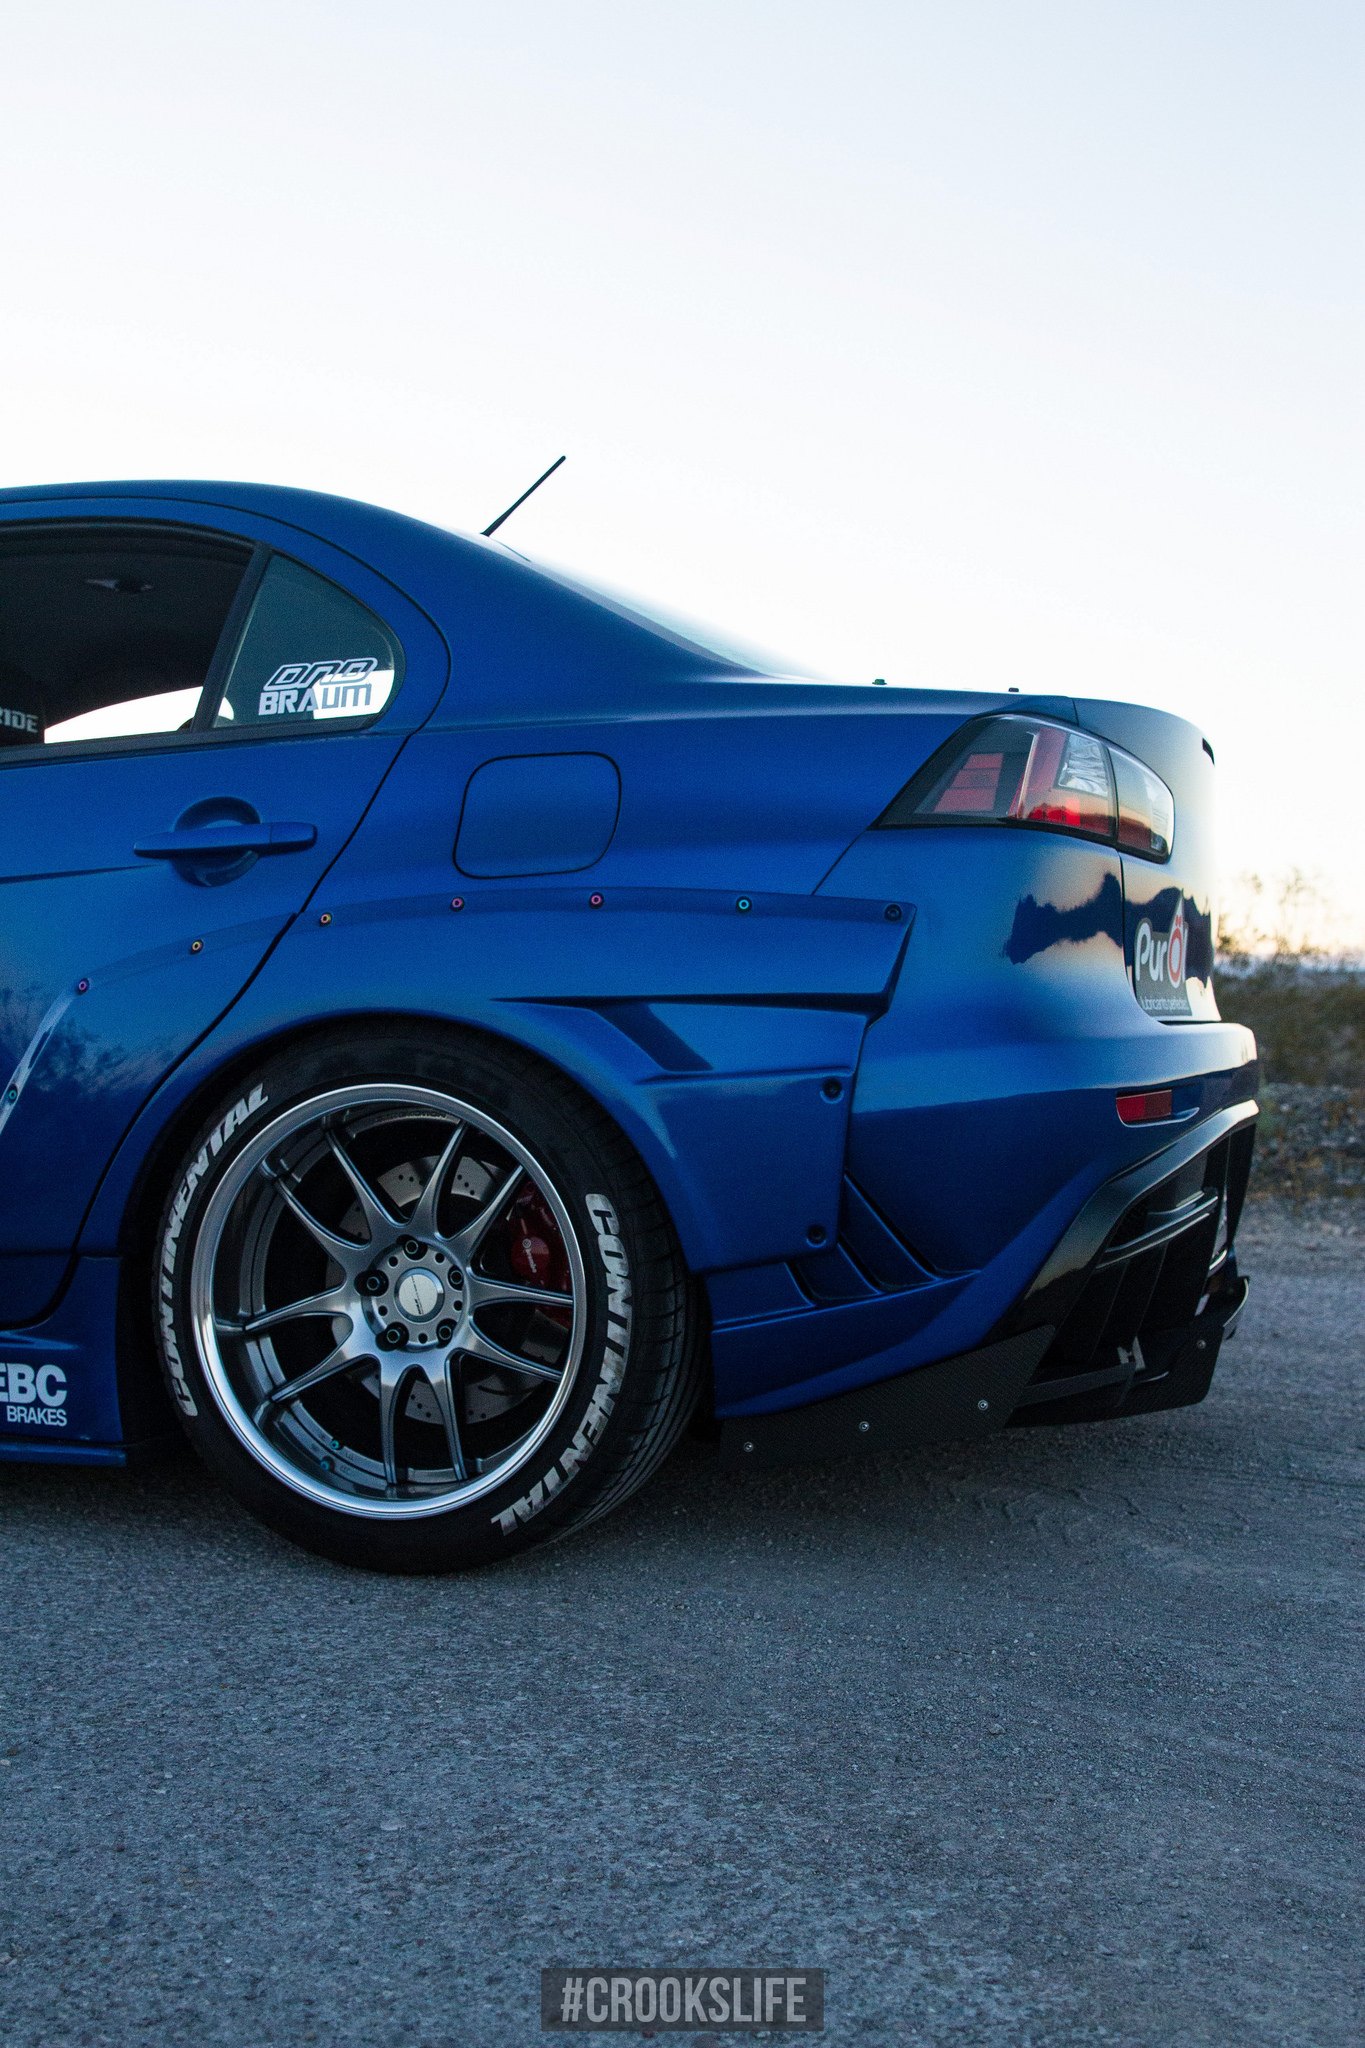 Blue Mitsubishi Lancer Evolution with Continental Tires  - Photo by Jimmy Crook